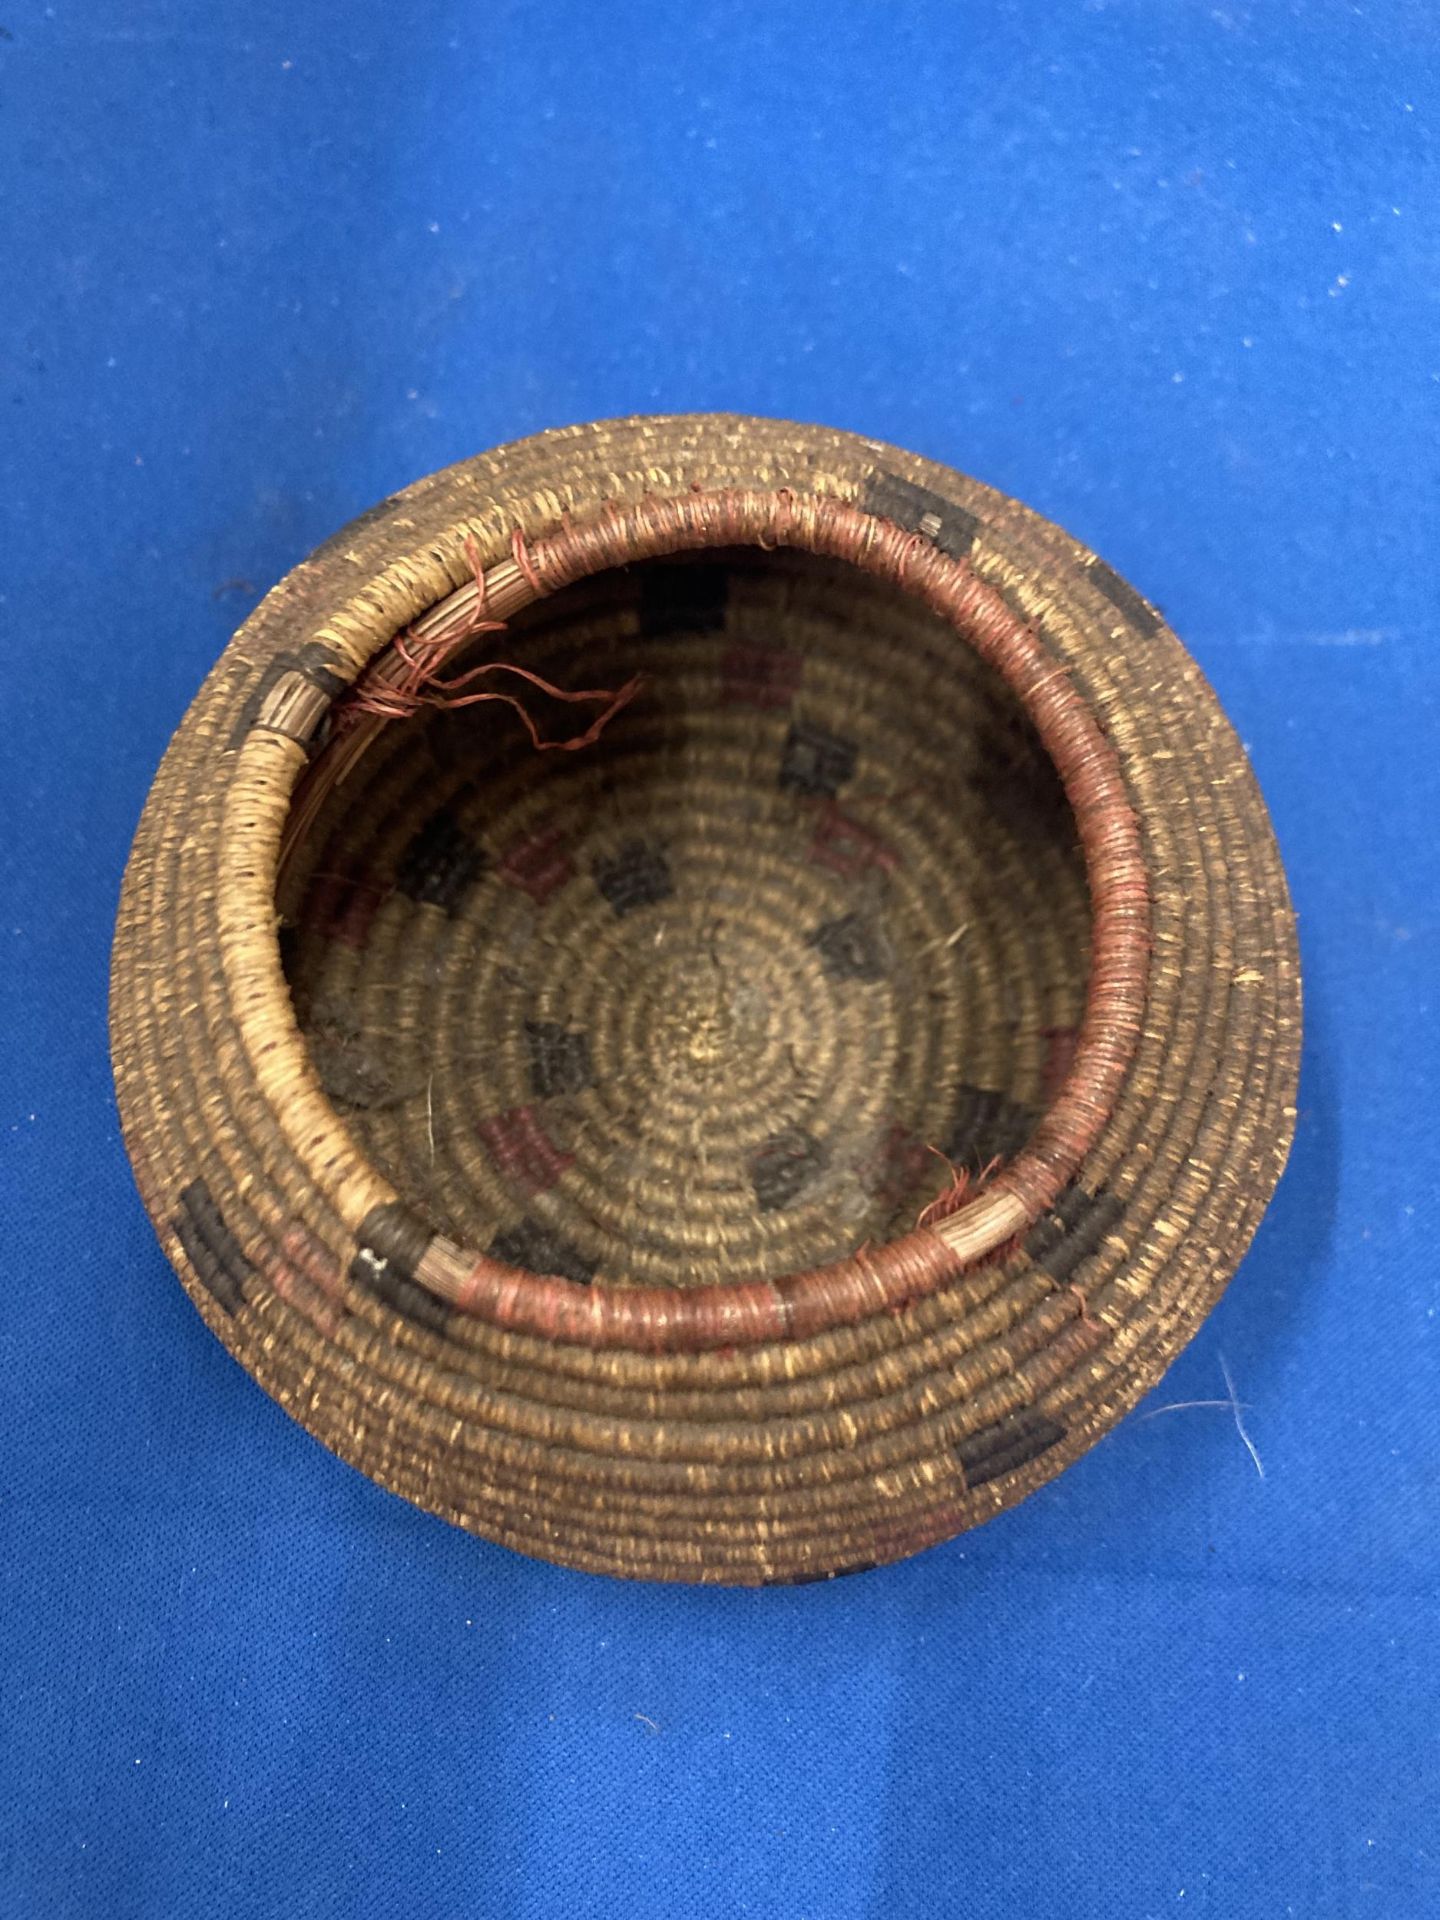 A LATE 19TH/EARLY 20TH CENTURY INDIAN BASKET HEIGHT 6CM - Image 2 of 3